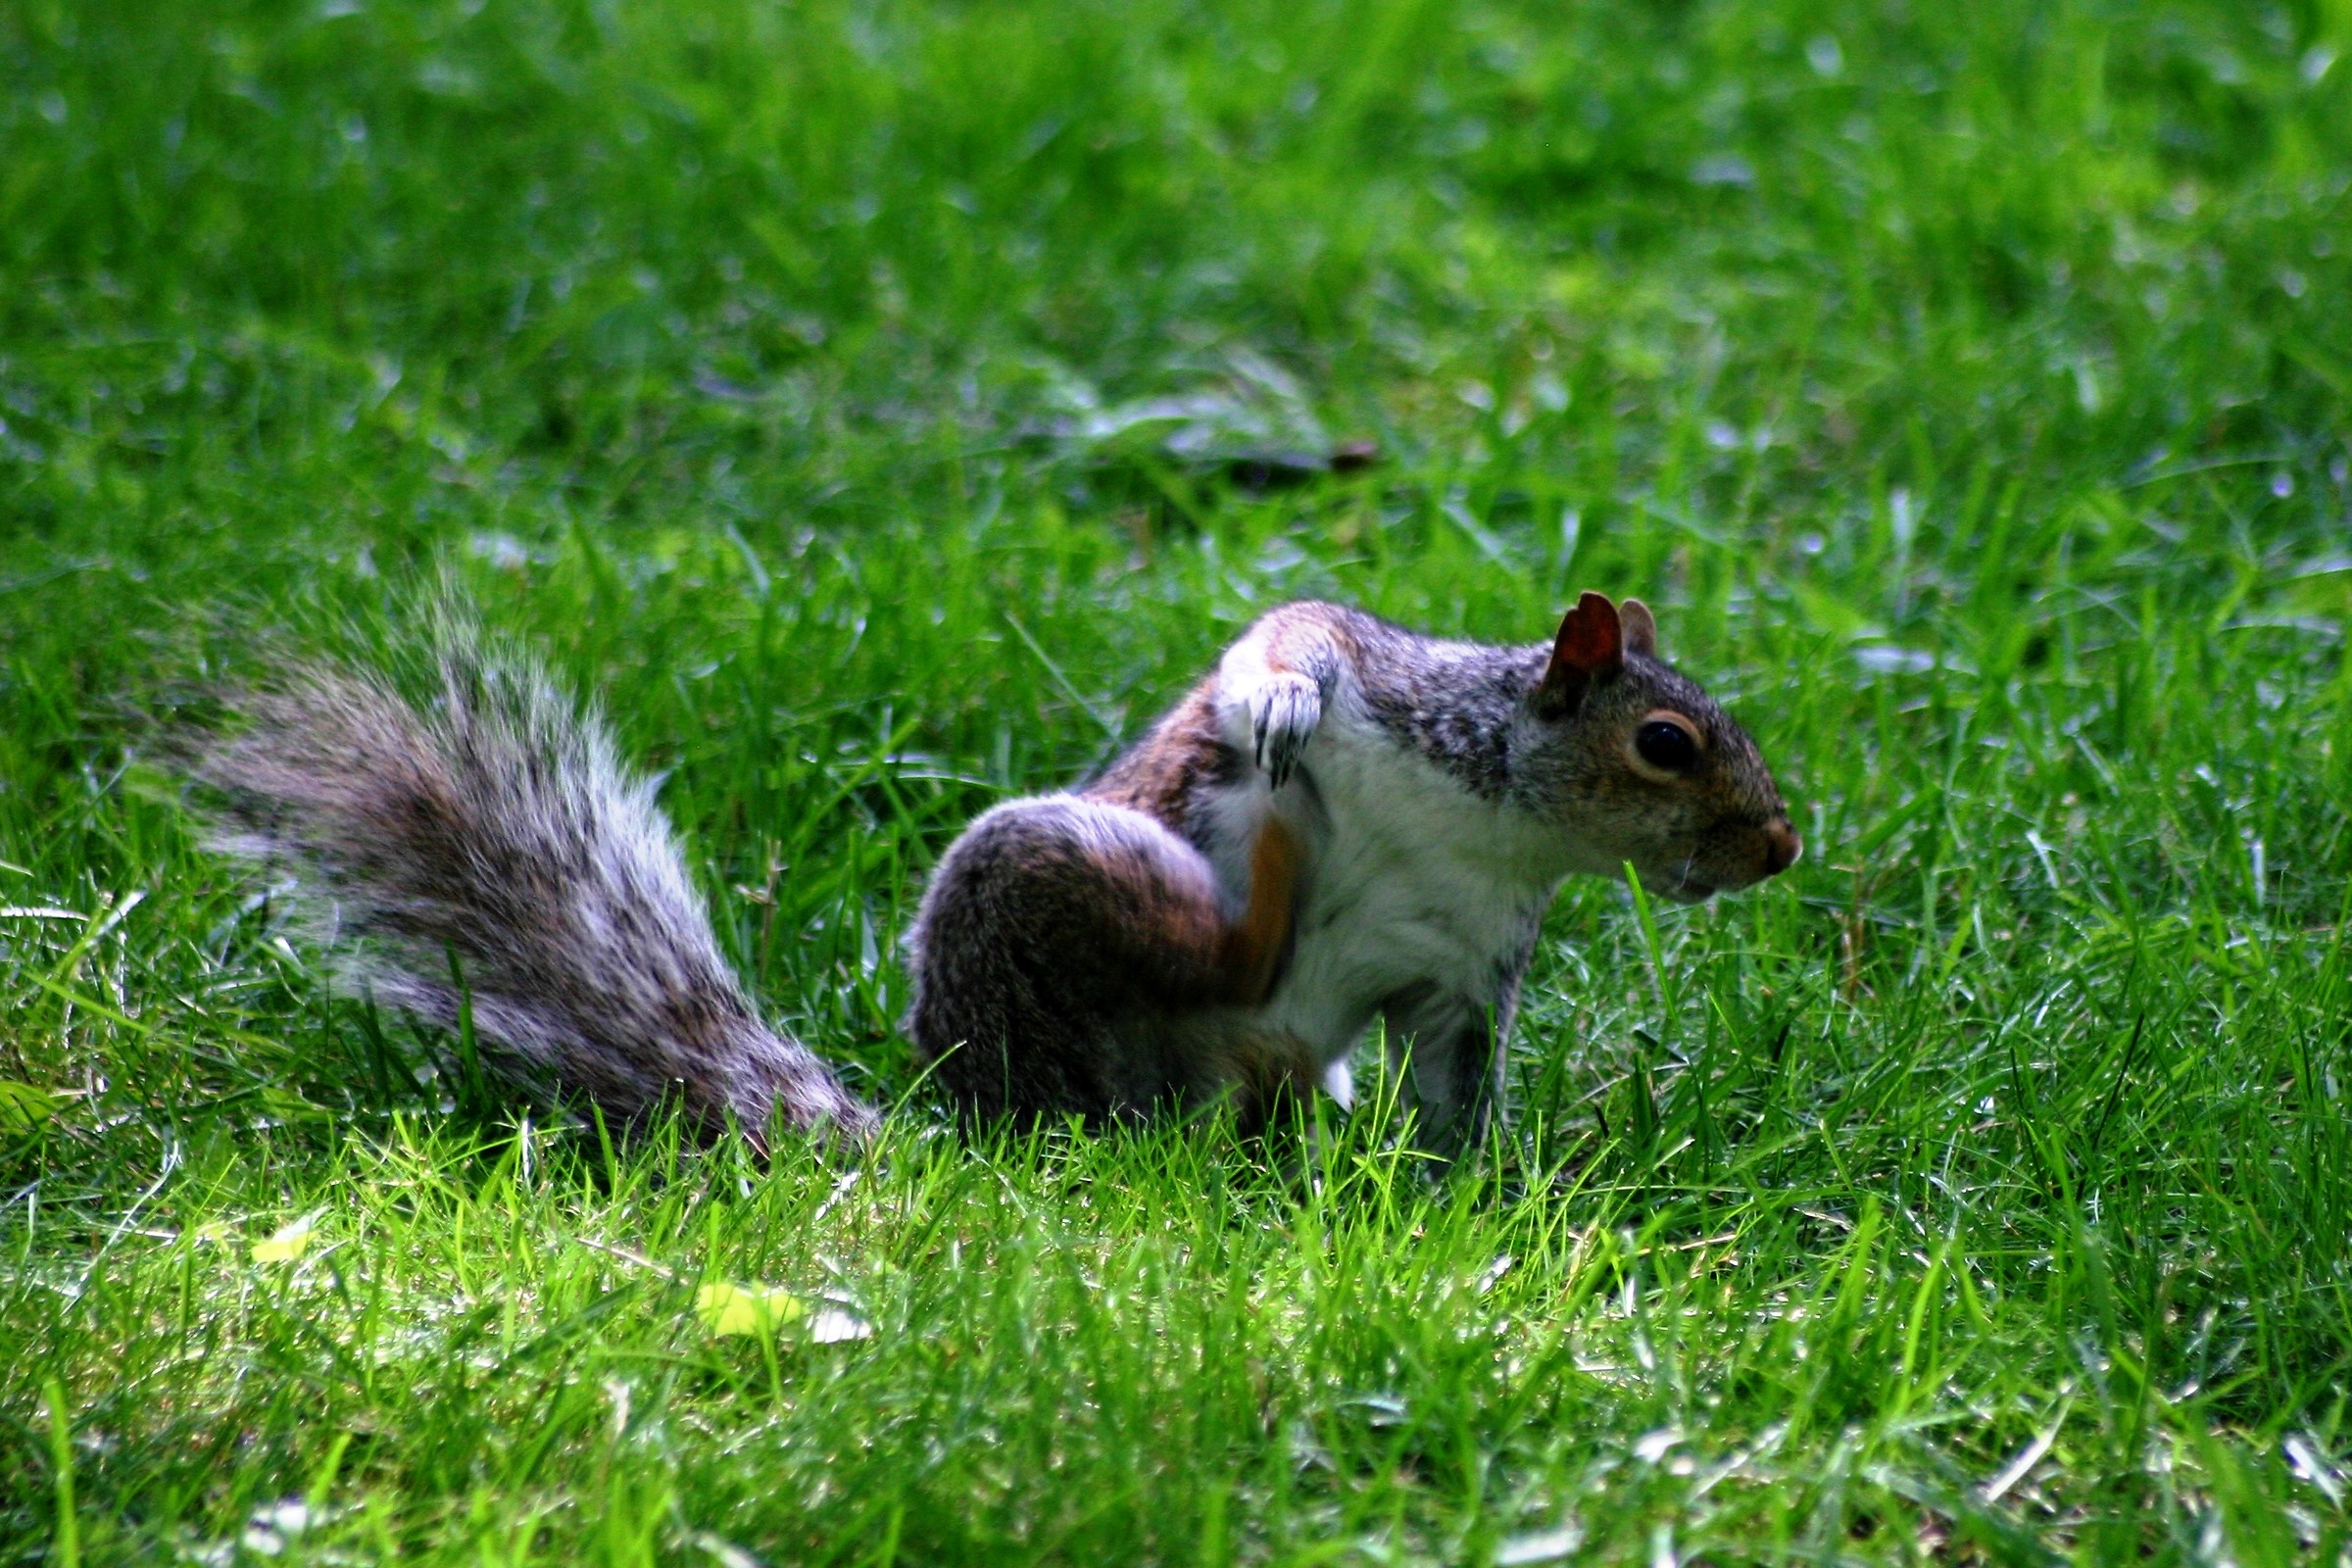 The Central Park squirrel scratches itself...